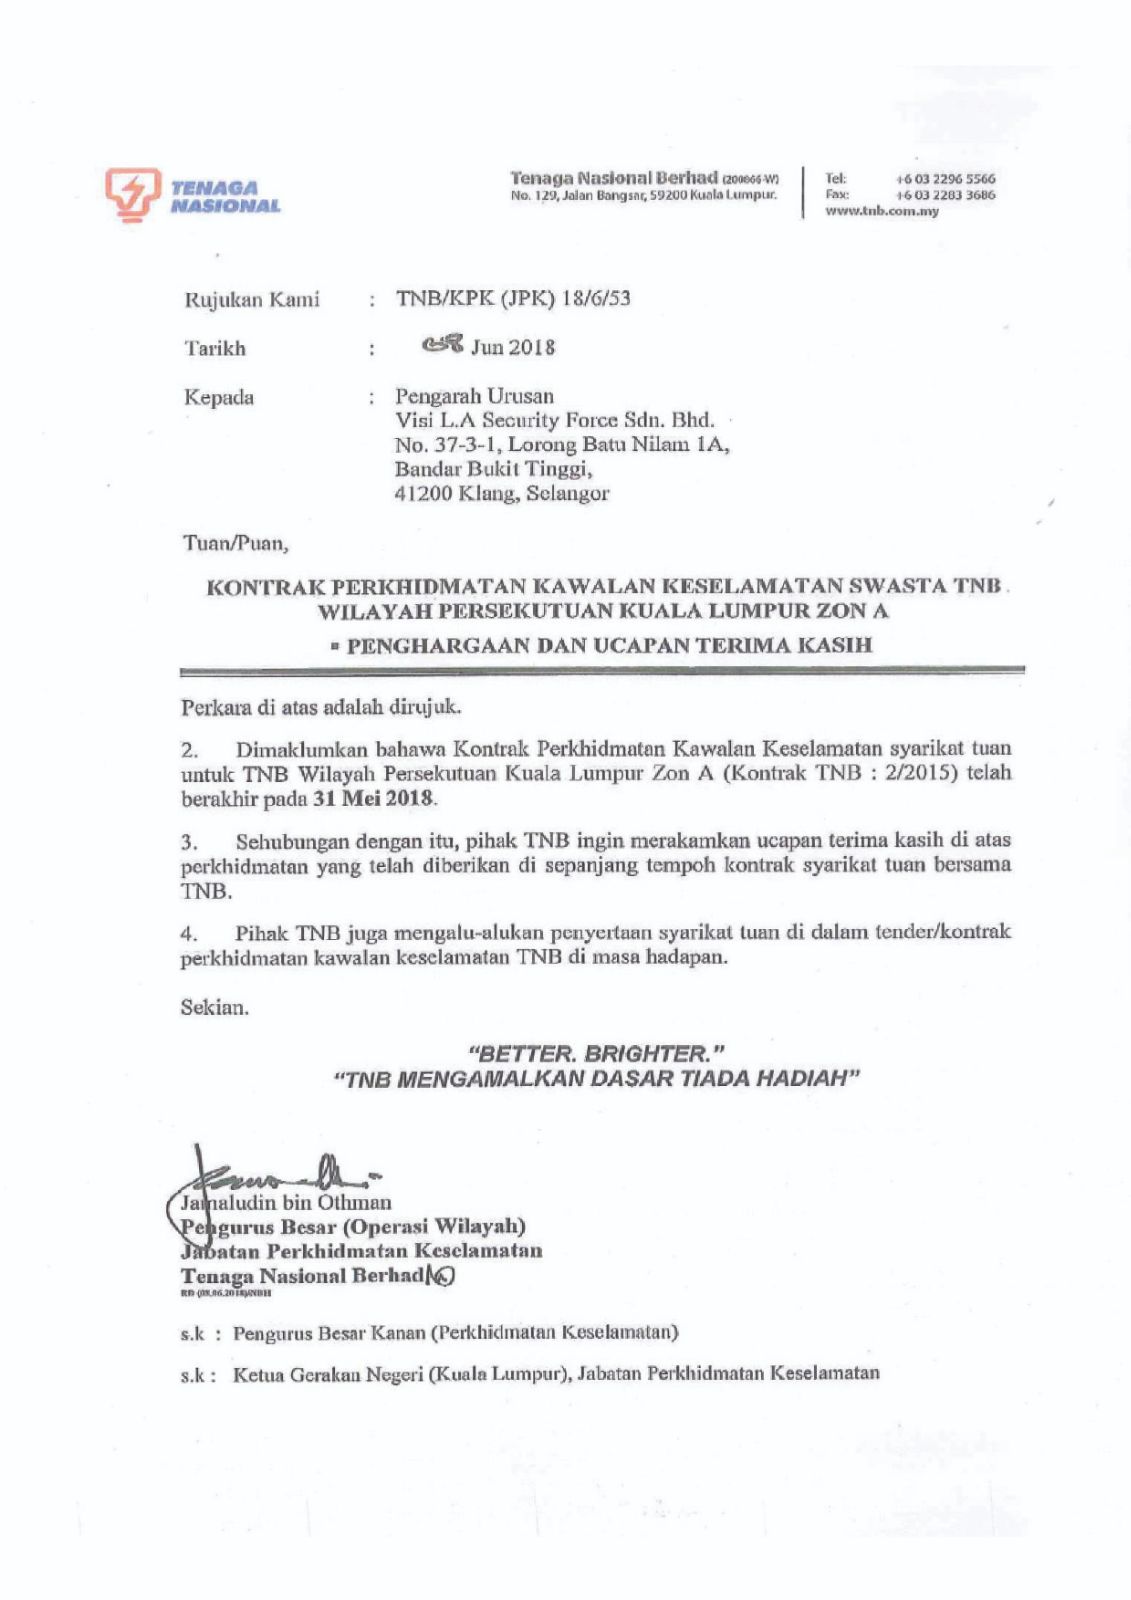 Thank You Note From TNB, Kuala Lumpur & Visi L.A. Security Force Sdn Bhd